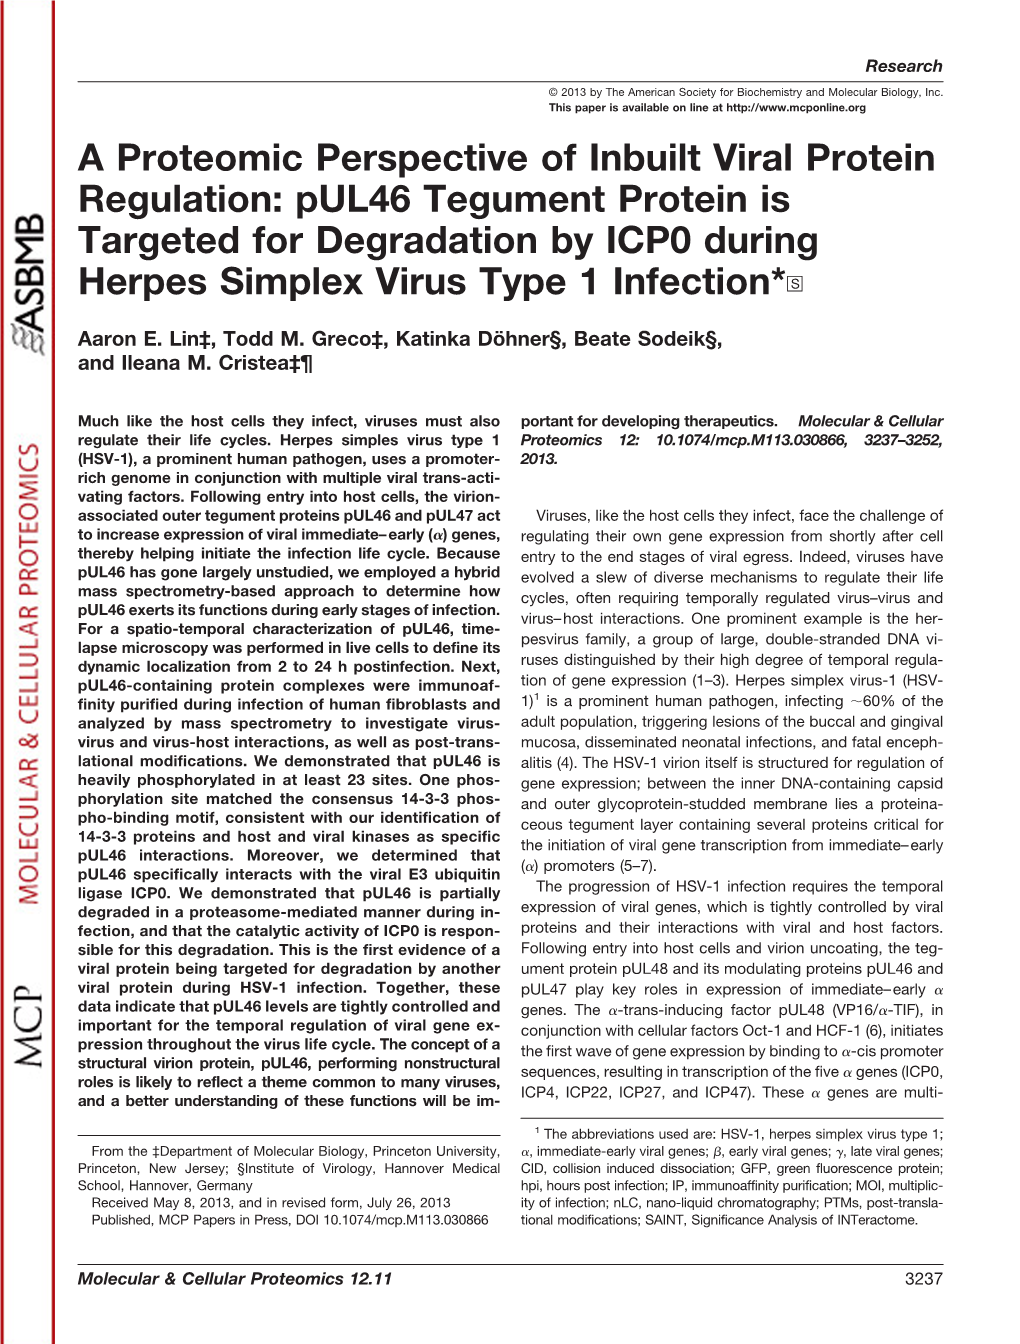 Pul46 Tegument Protein Is Targeted for Degradation by ICP0 During Herpes Simplex Virus Type 1 Infection*□S